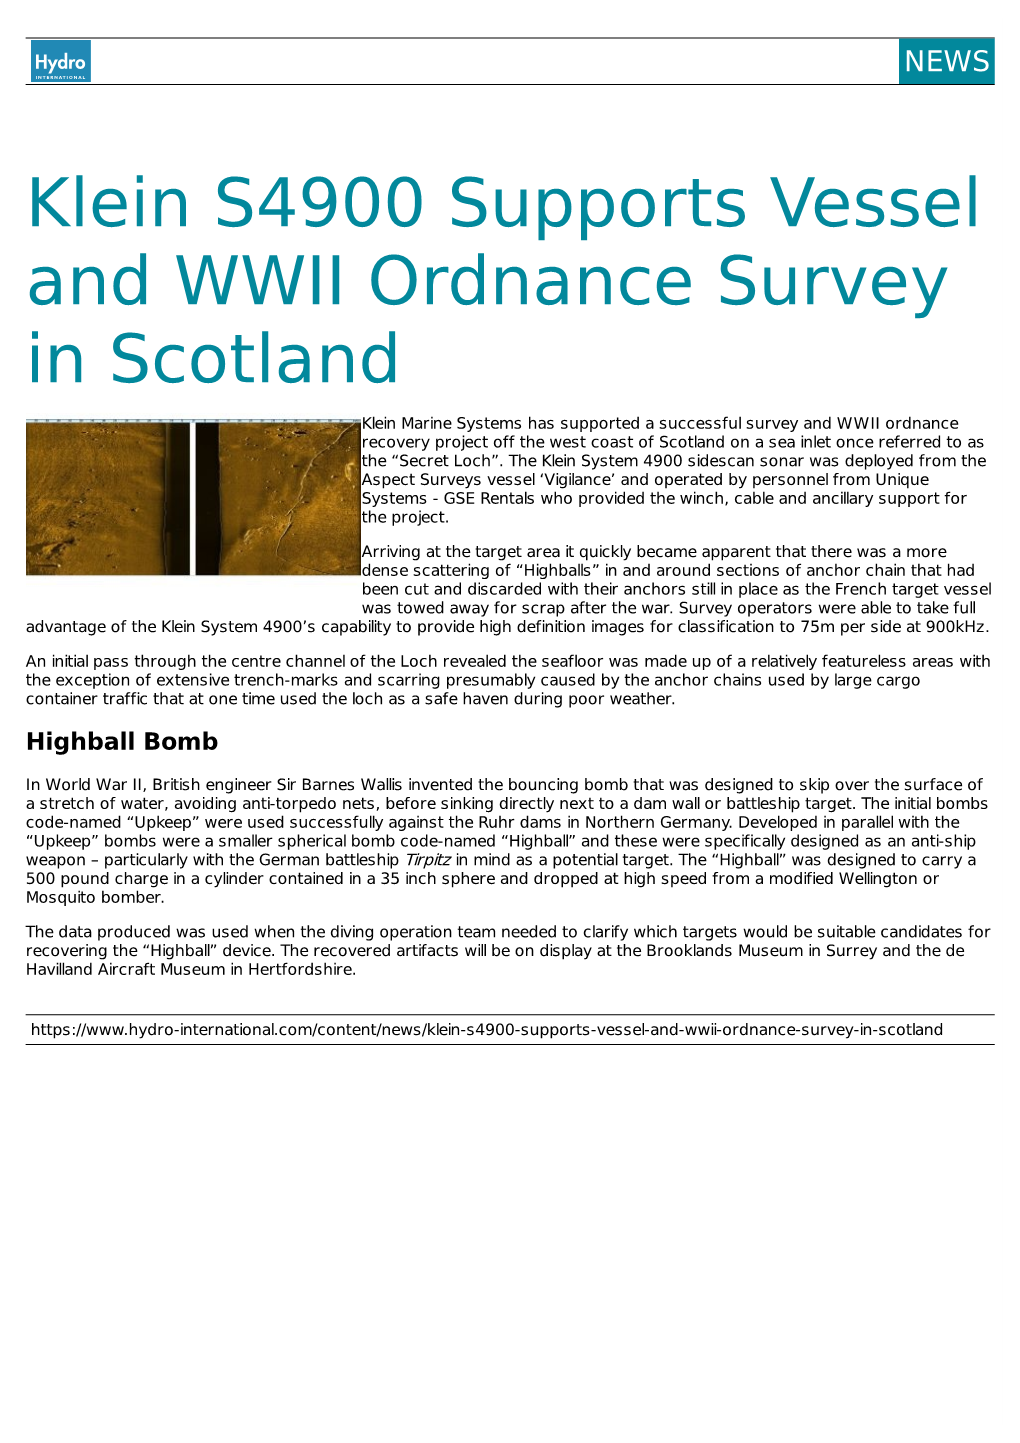 Klein S4900 Supports Vessel and WWII Ordnance Survey in Scotland